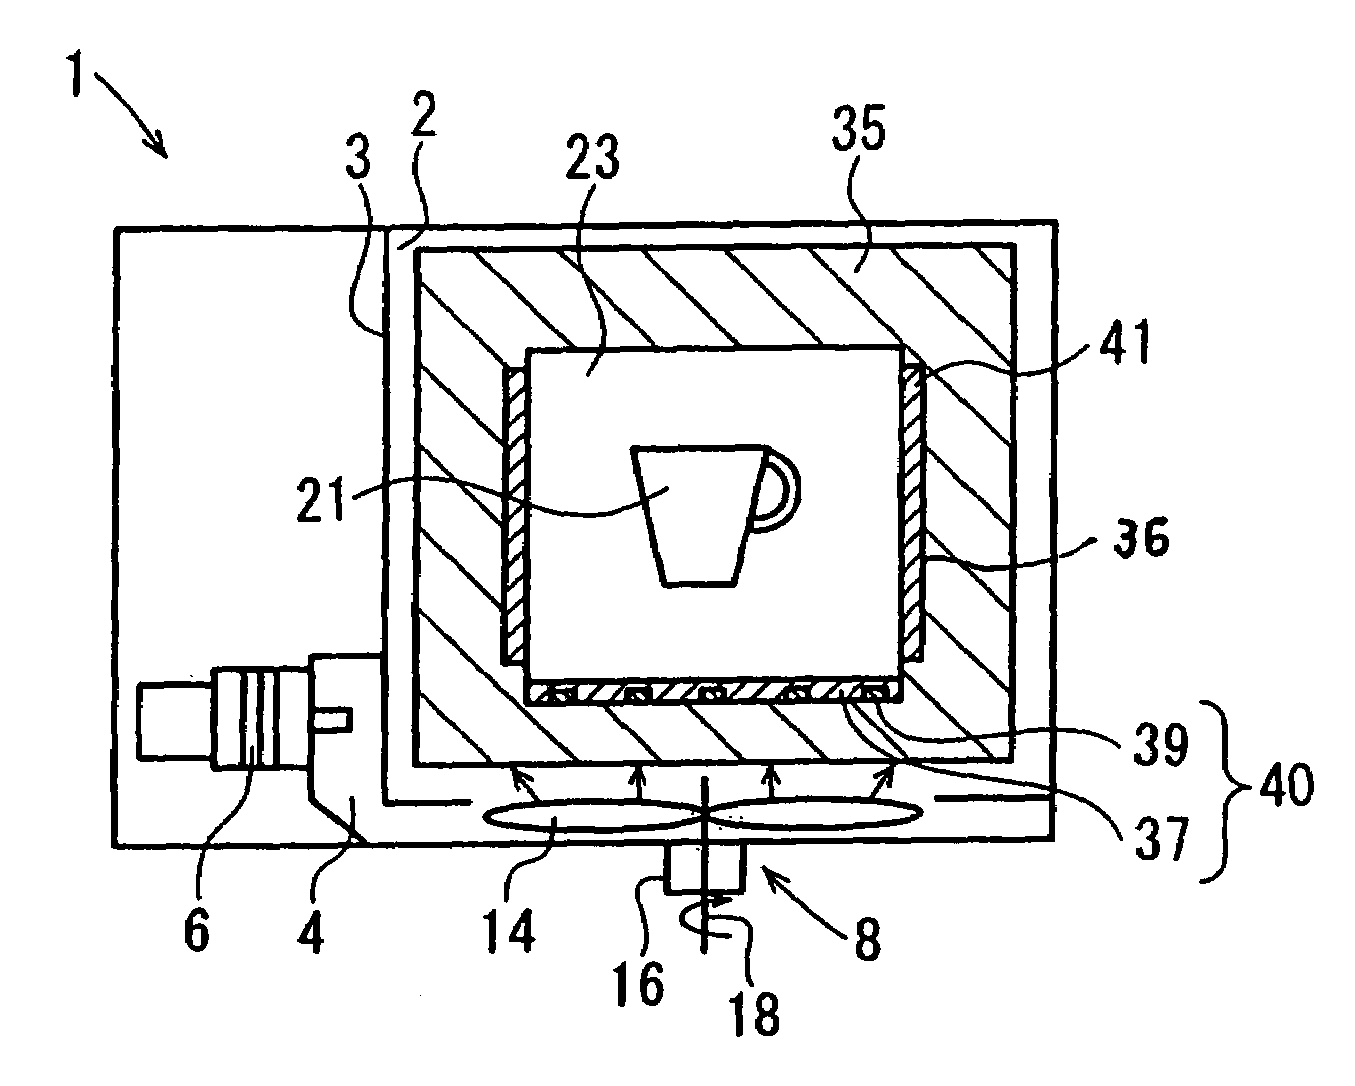 Microwave burning furnace including heating element having two types of materials